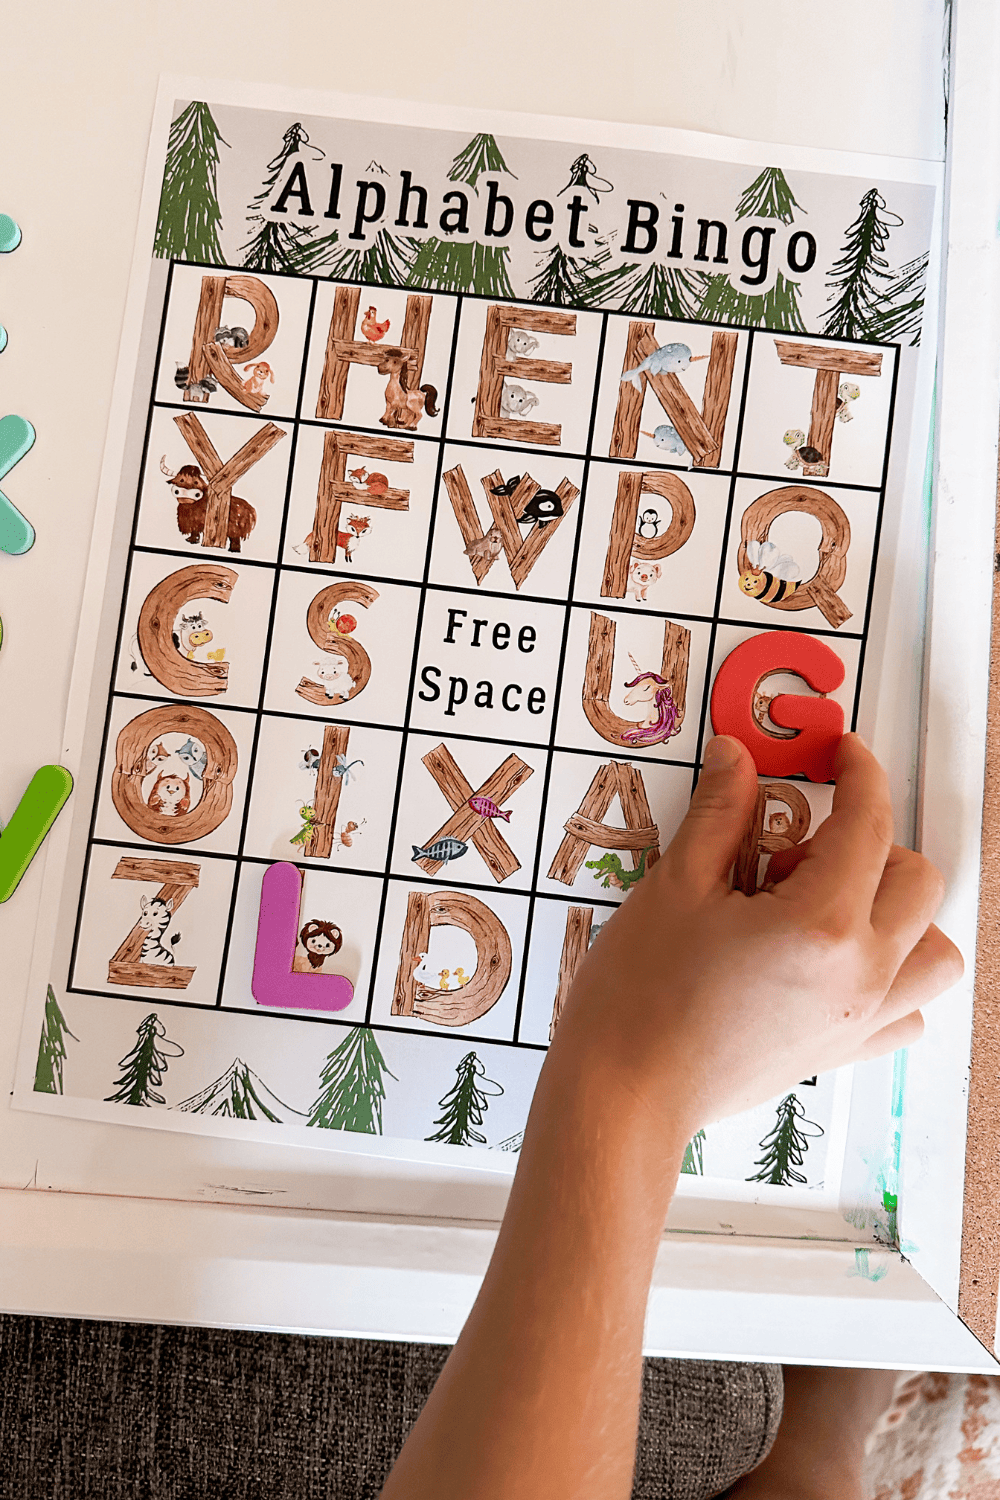 Alphabet bingo, a bingo board with a bunch of different letters. A hand placing a magnetic letter G on the board.